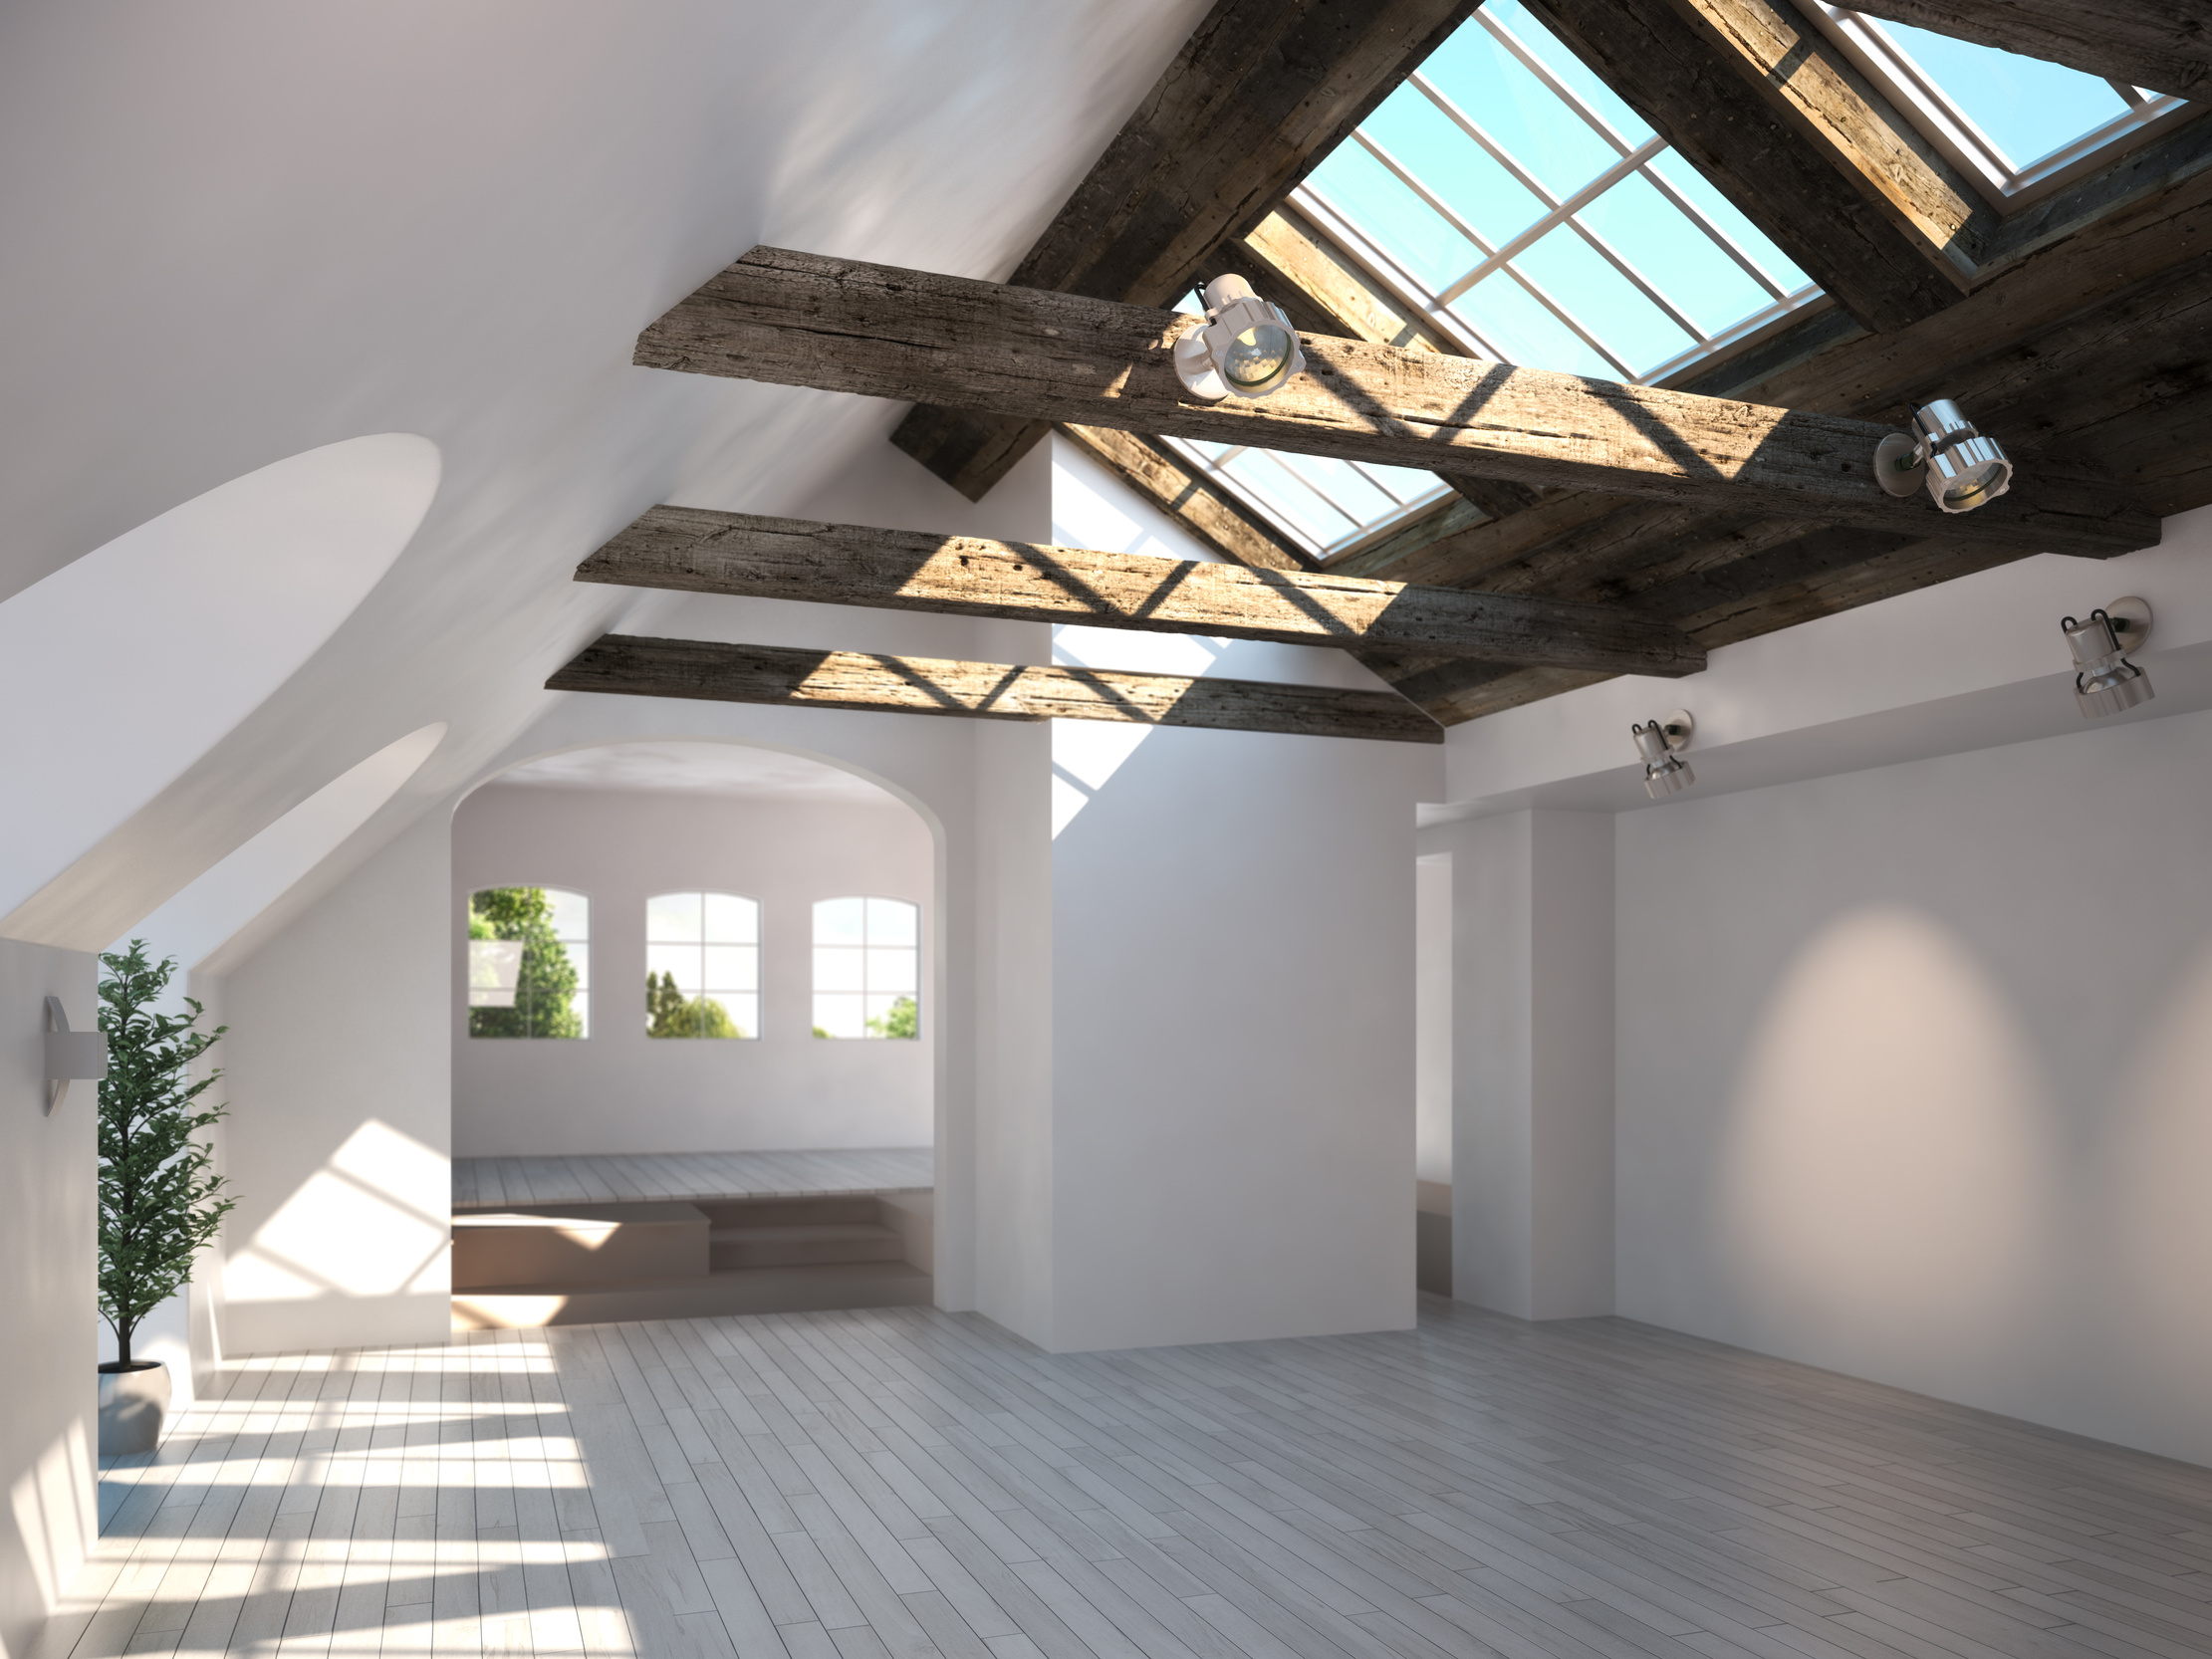 Empty room with rustic timber ceiling and skylights